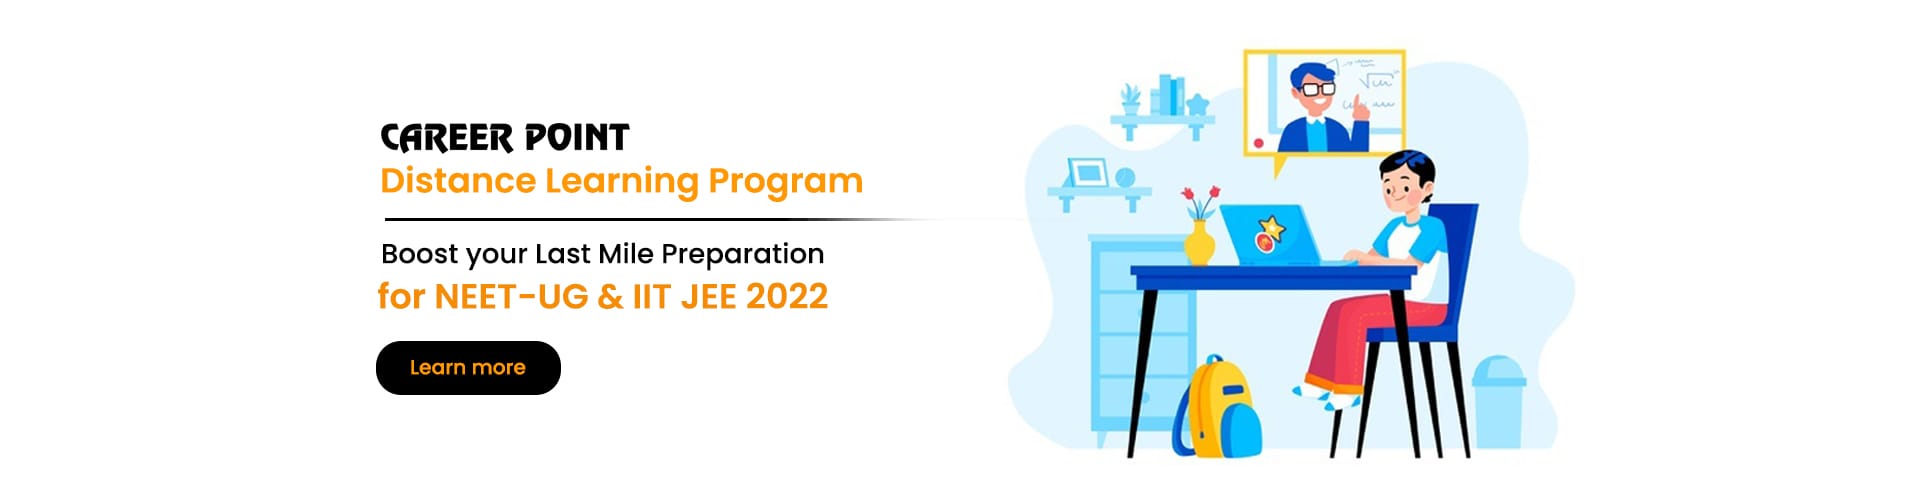 Career Point Distance Learning Program 2022